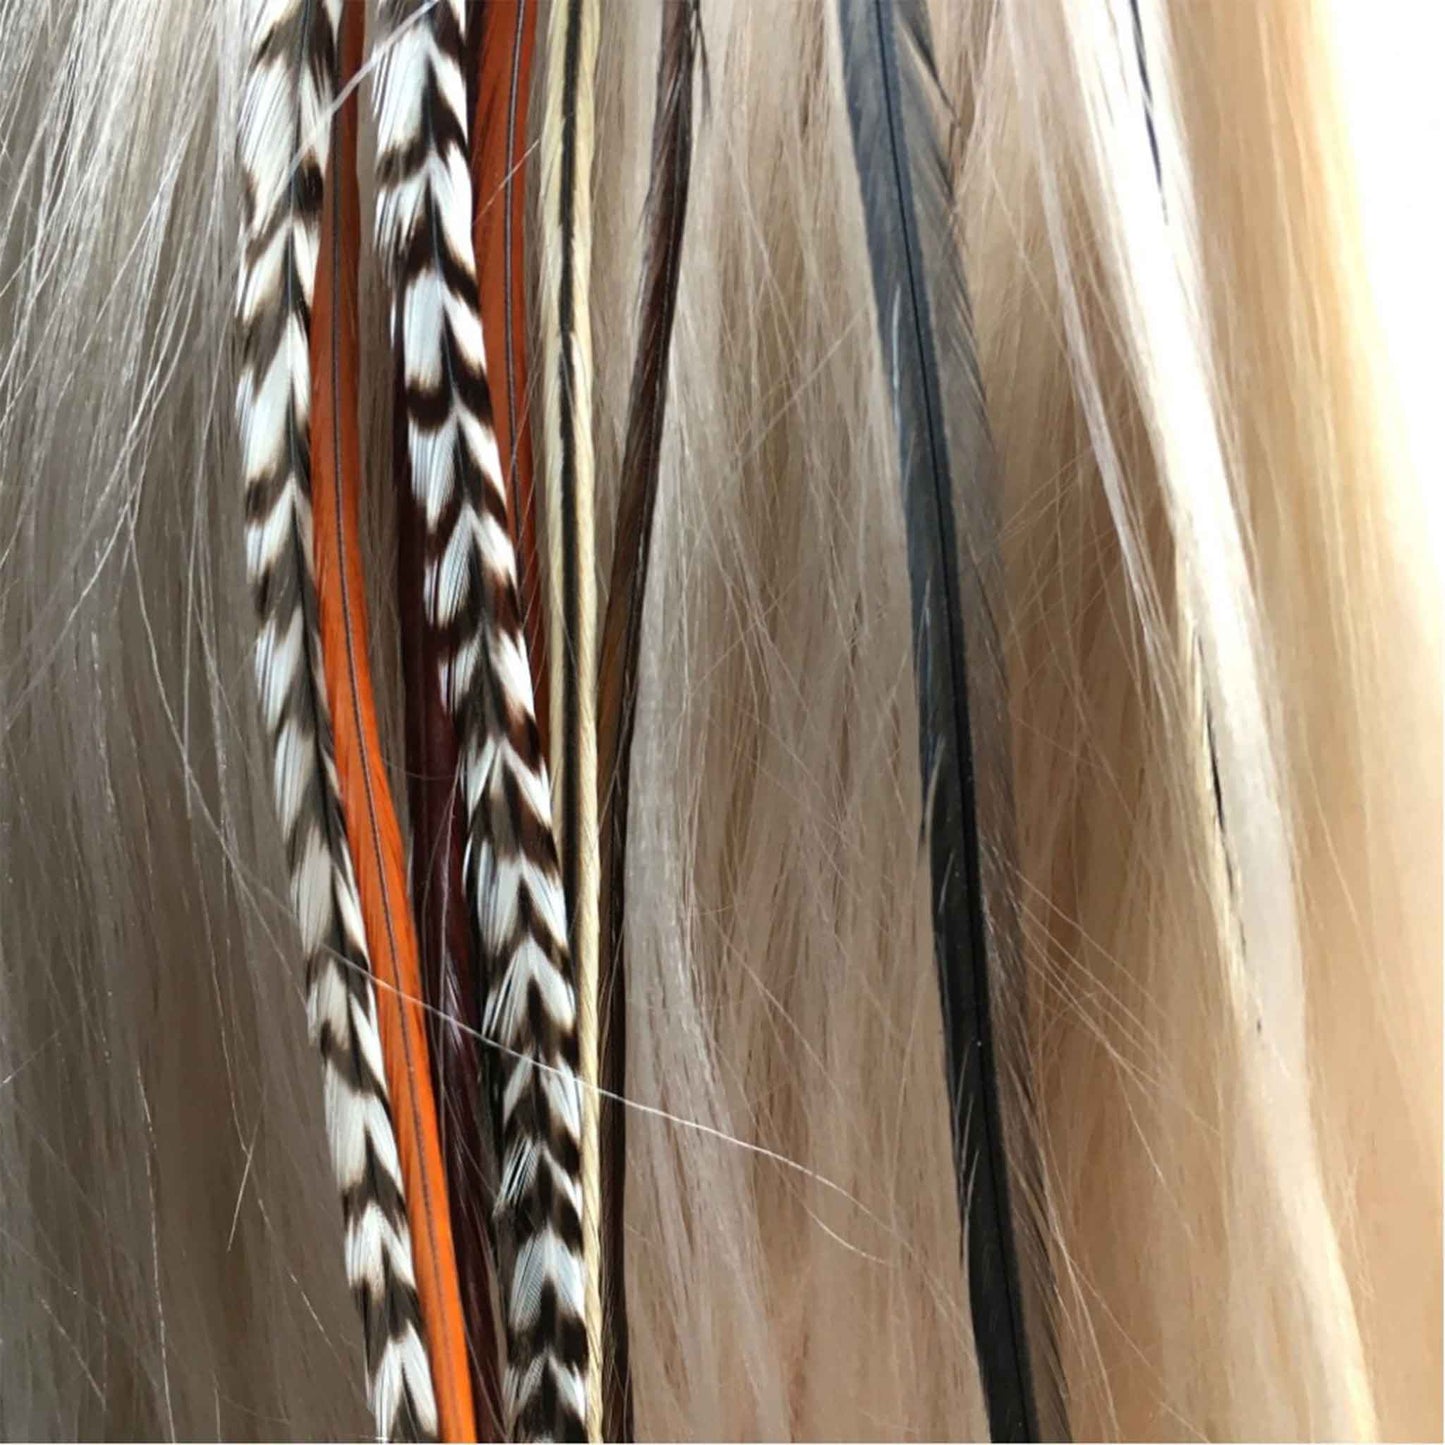 Feather extensions - Natural colors